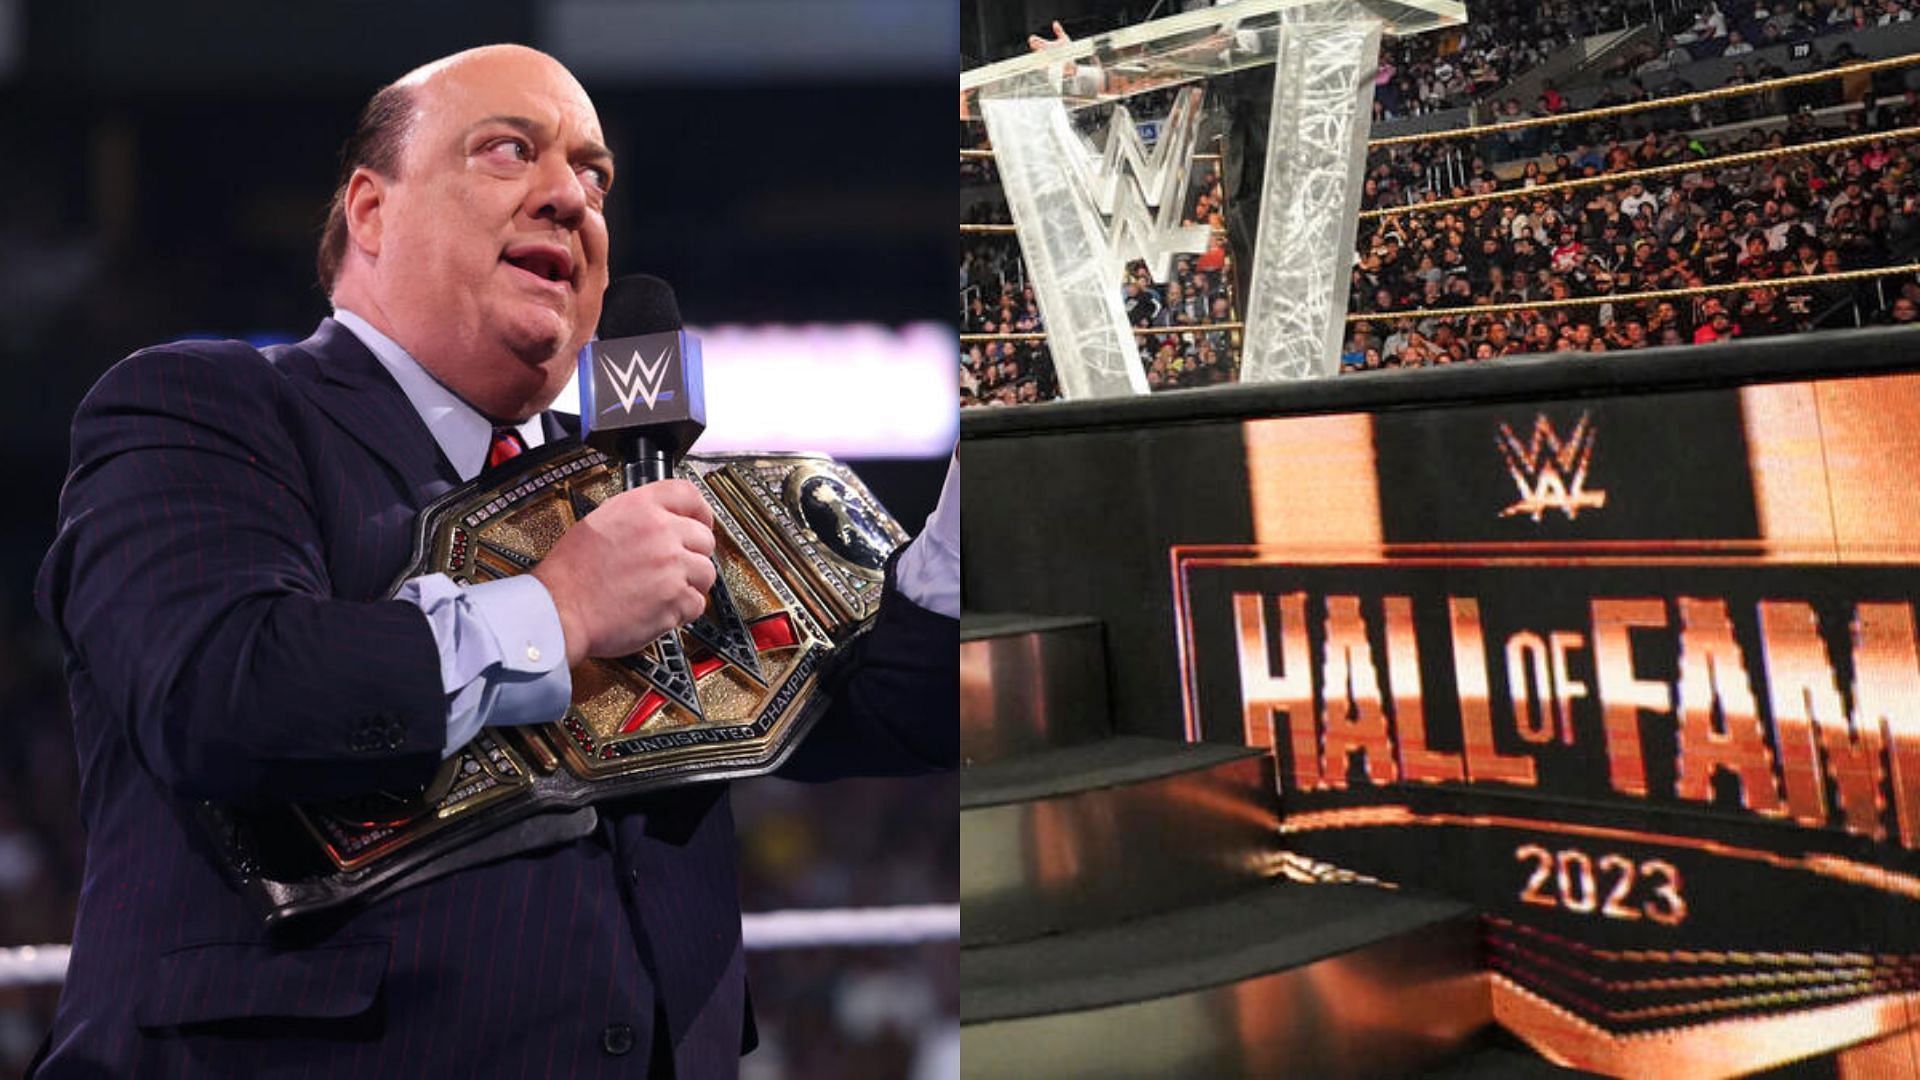 Paul Heyman is the first one to be inducted in this year